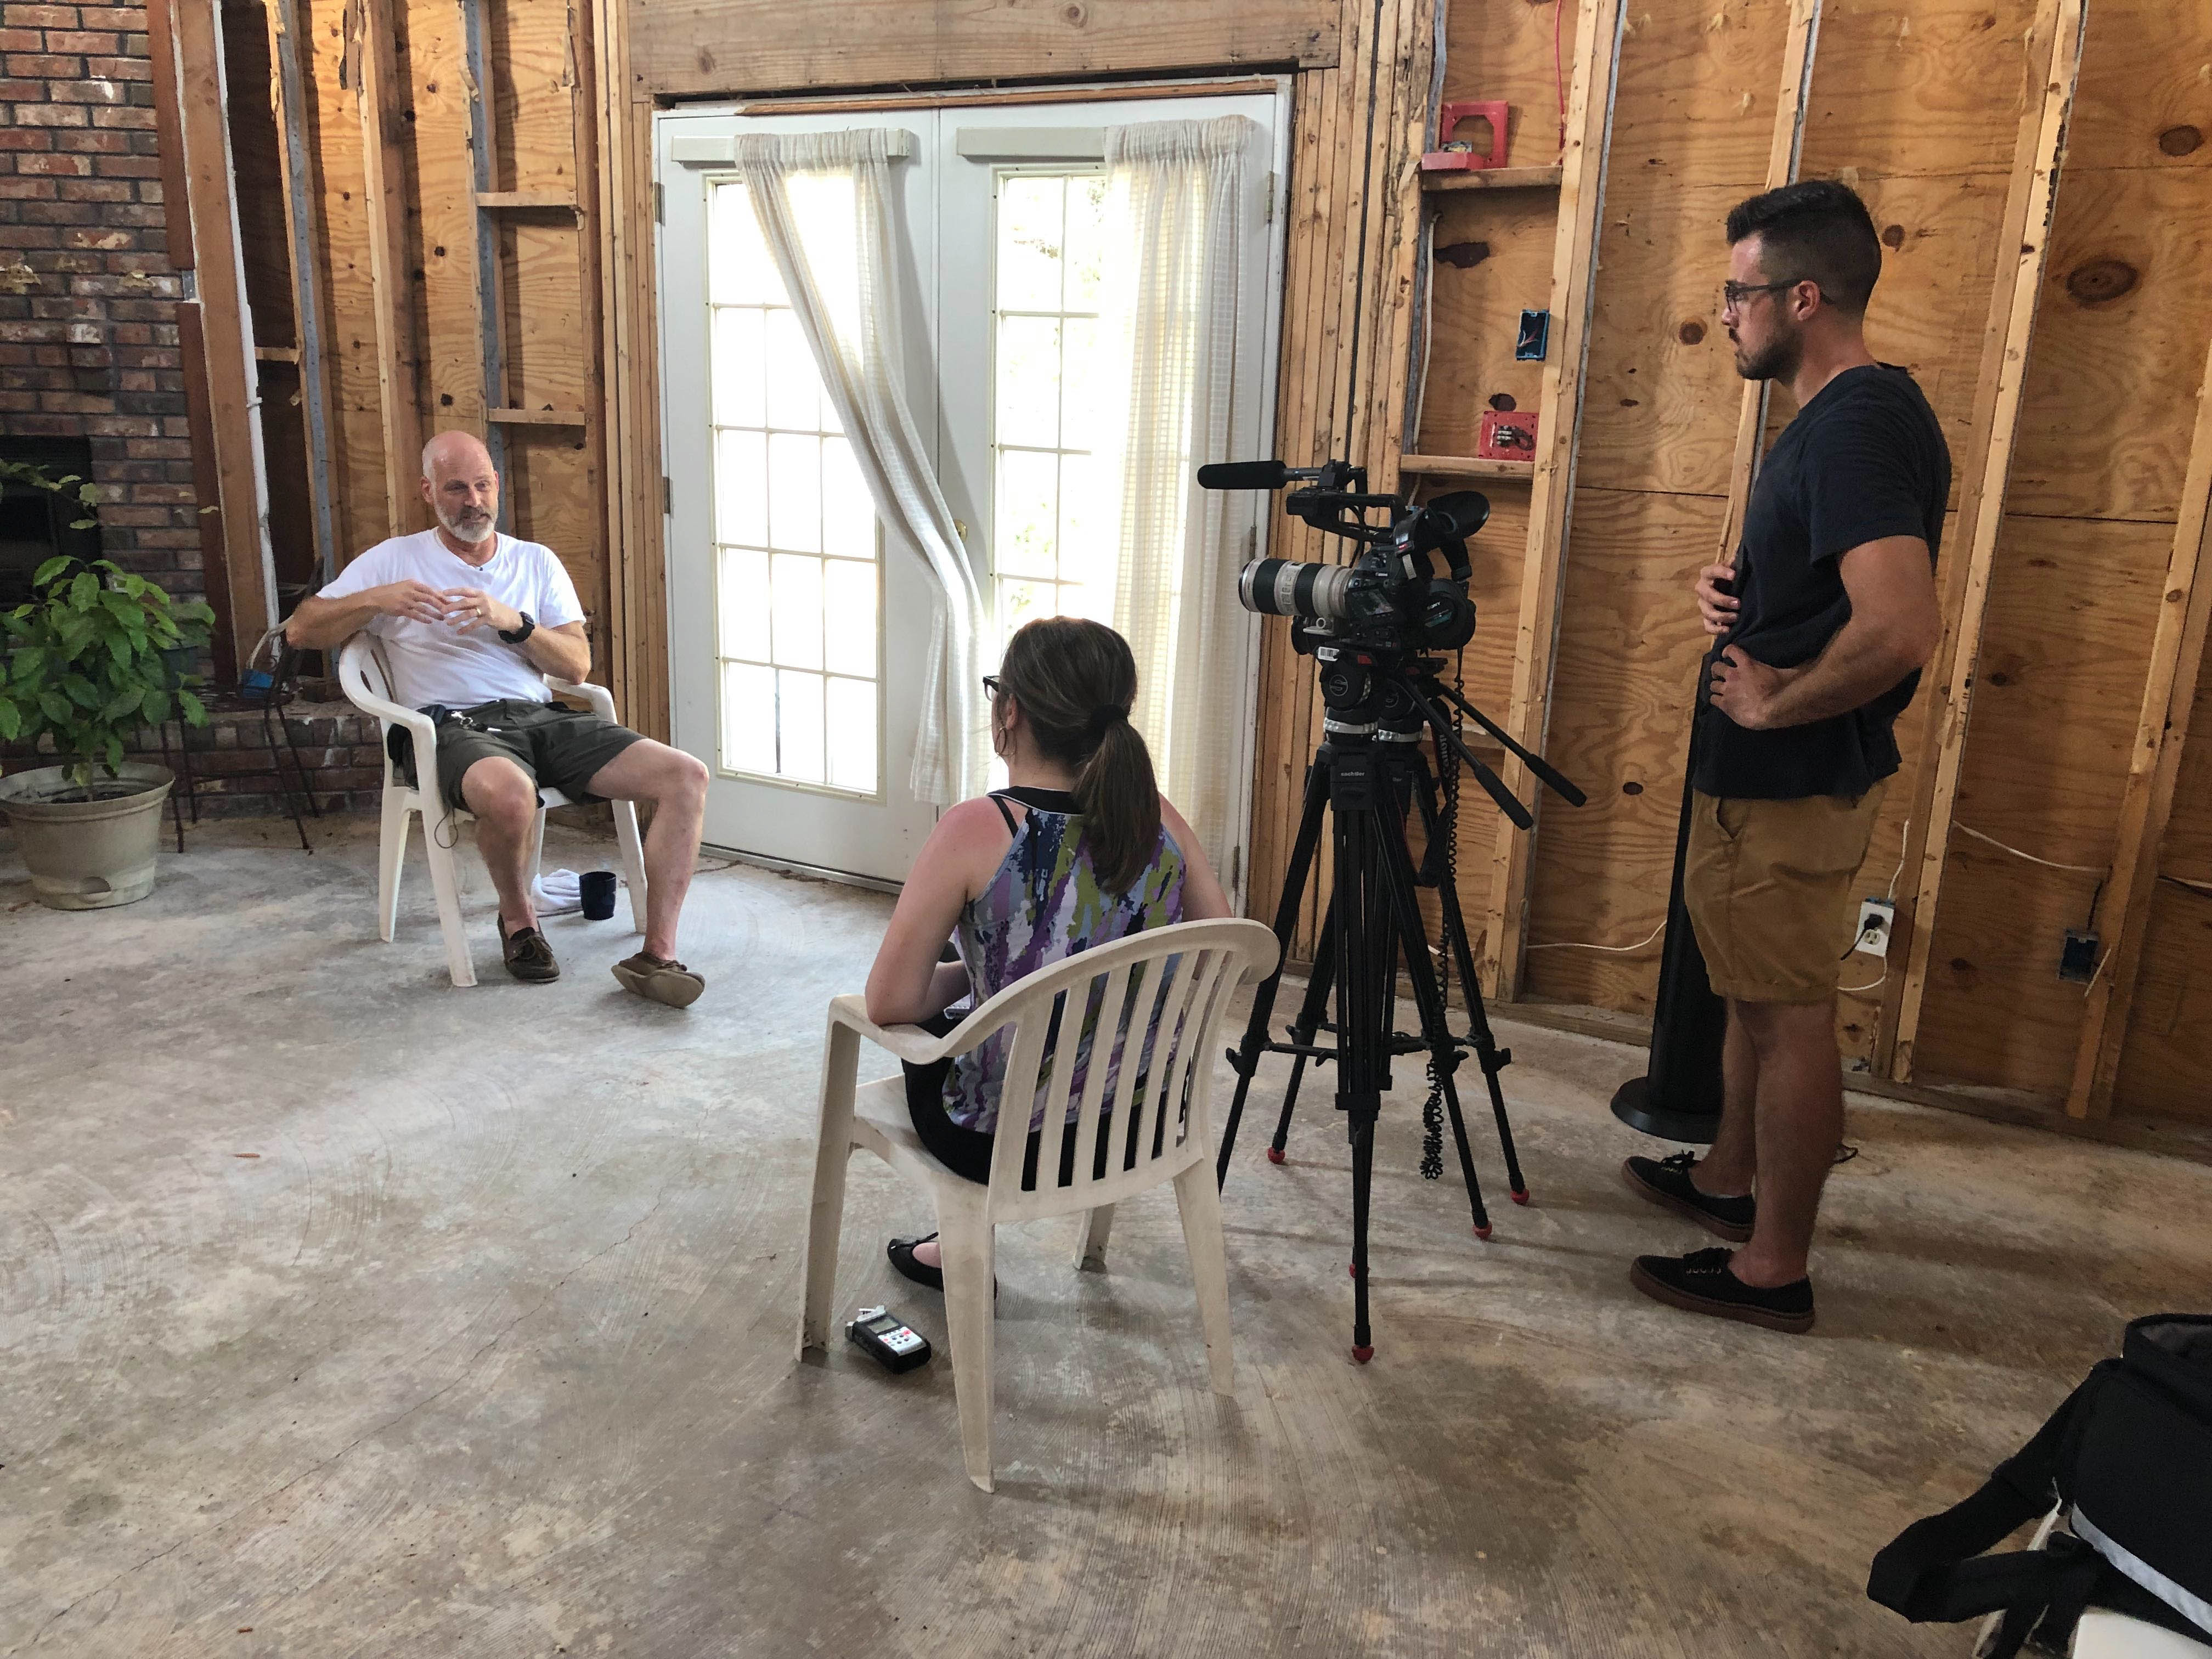 News21 student journalists interview a homeowner